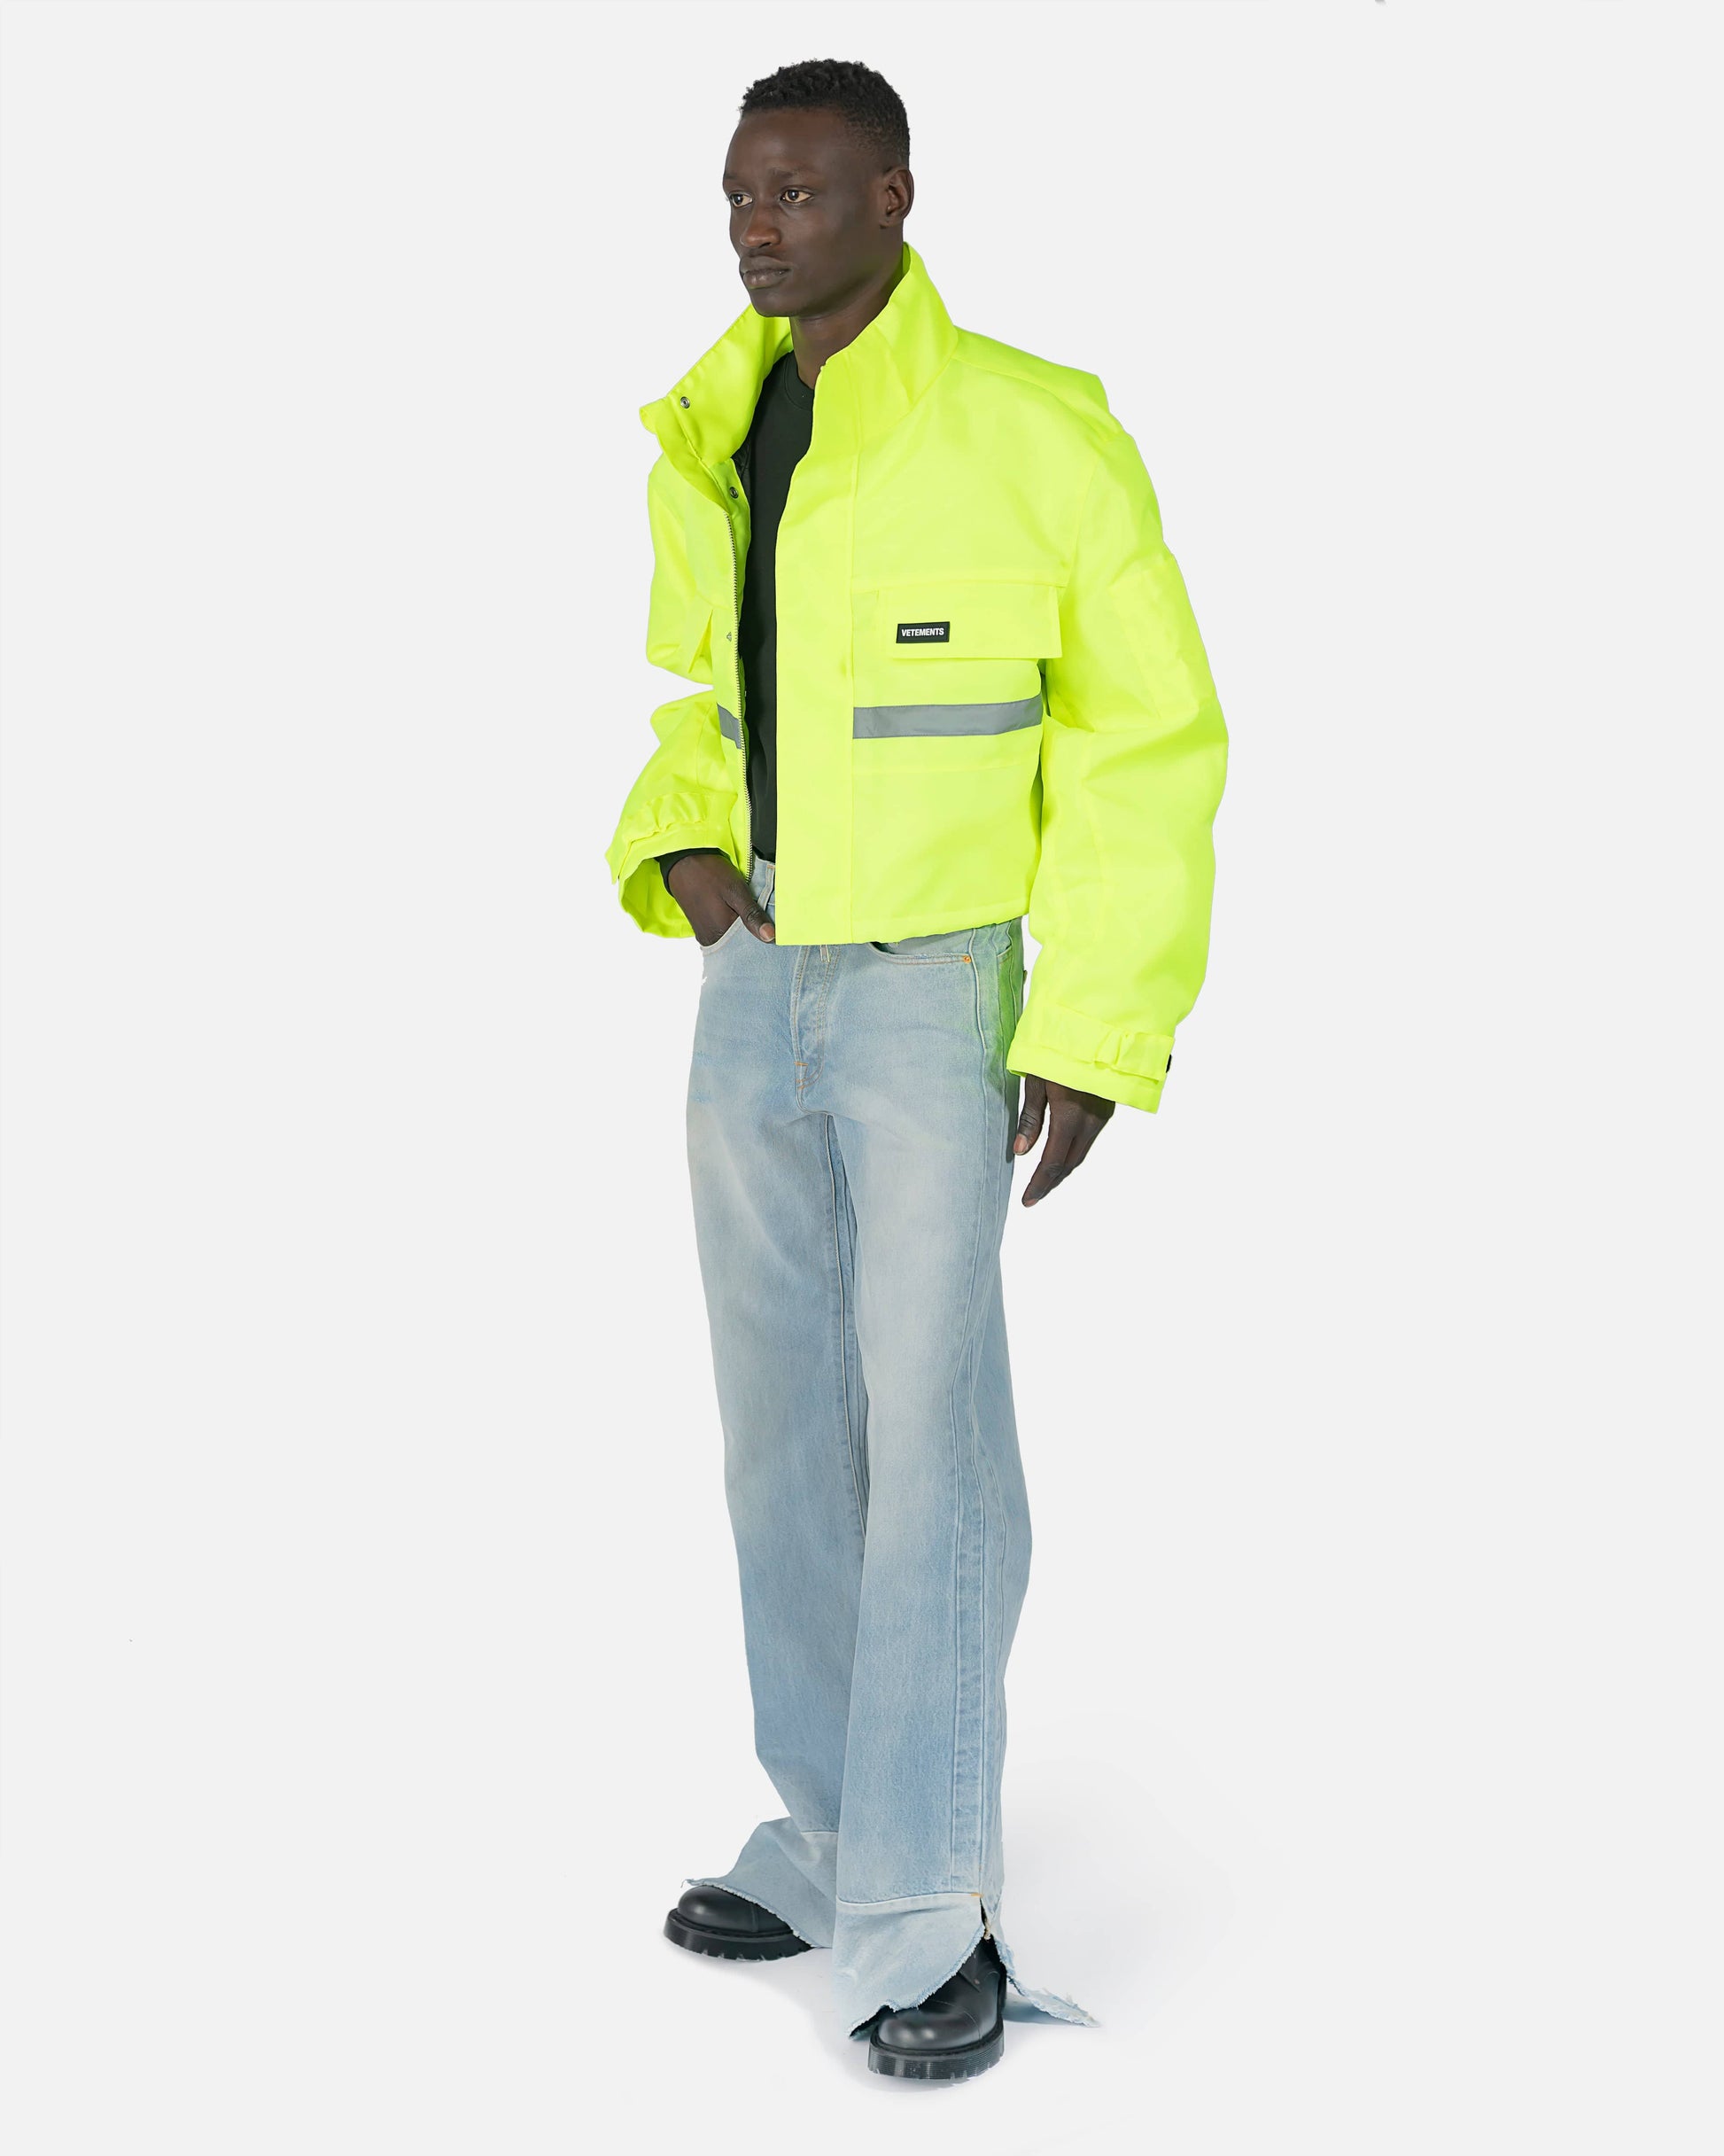 VETEMENTS Men's Jackets Cropped Reflective Parka in Neon Yellow